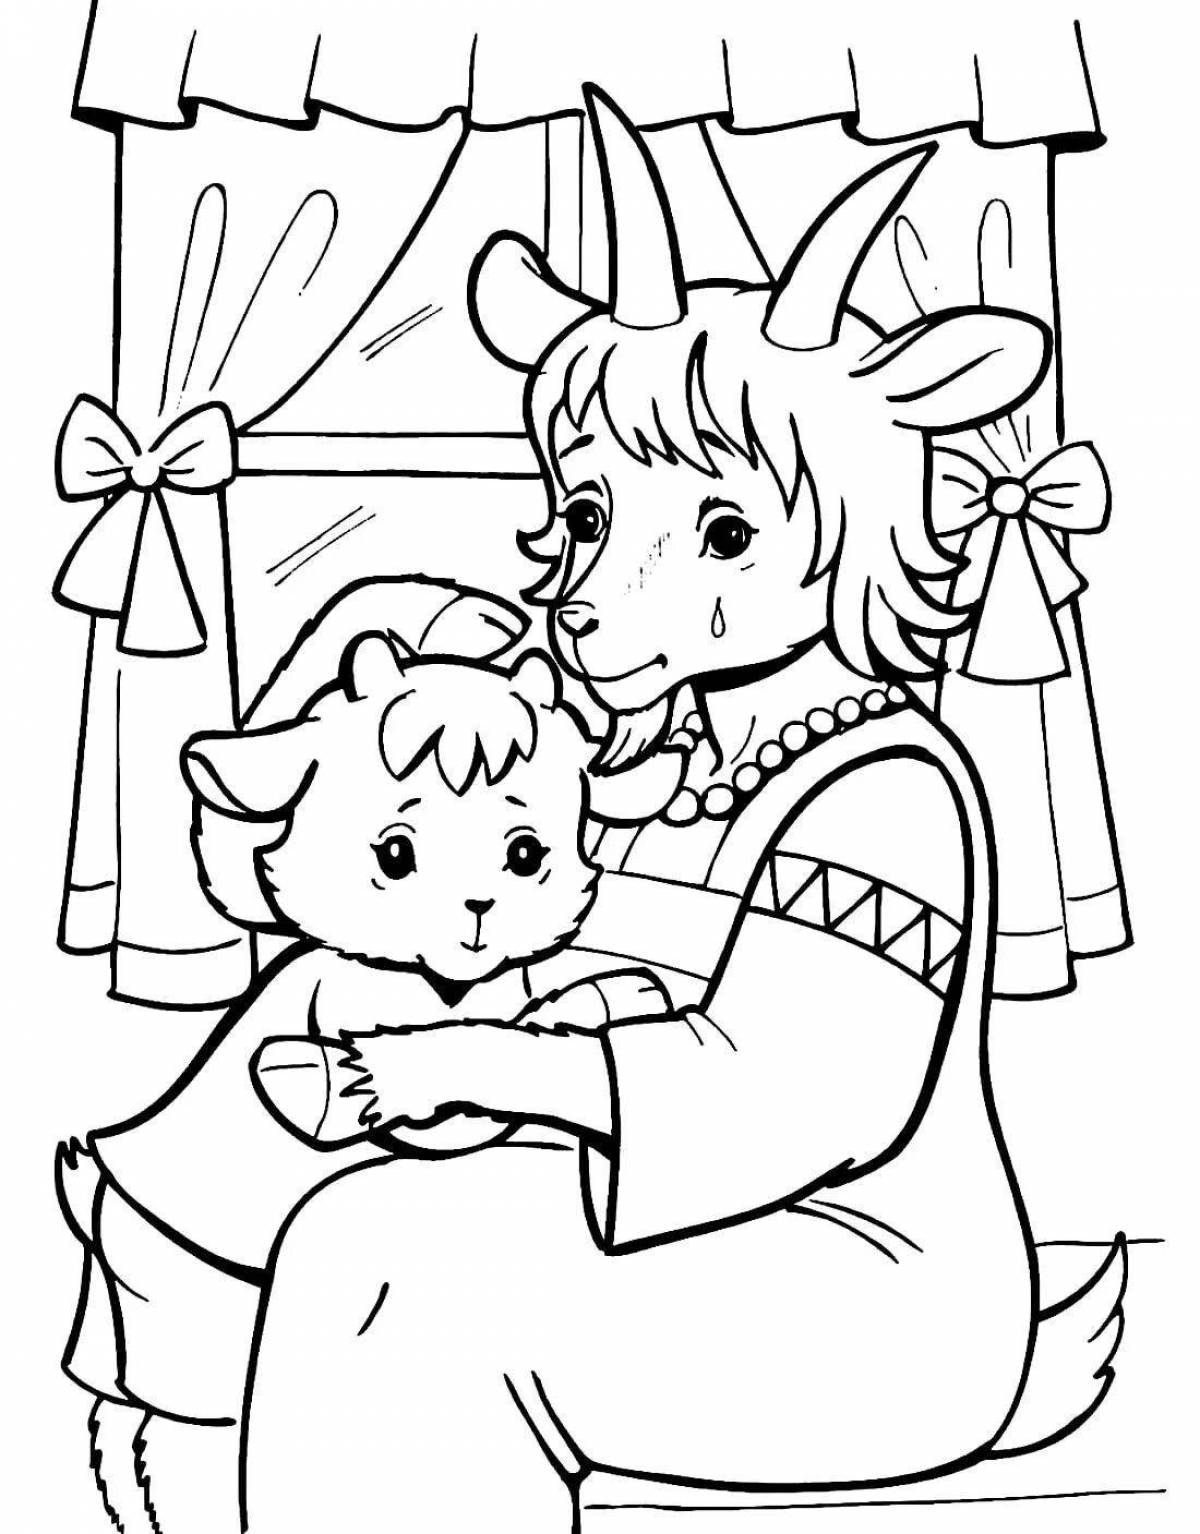 Fairy tale coloring book for preschoolers